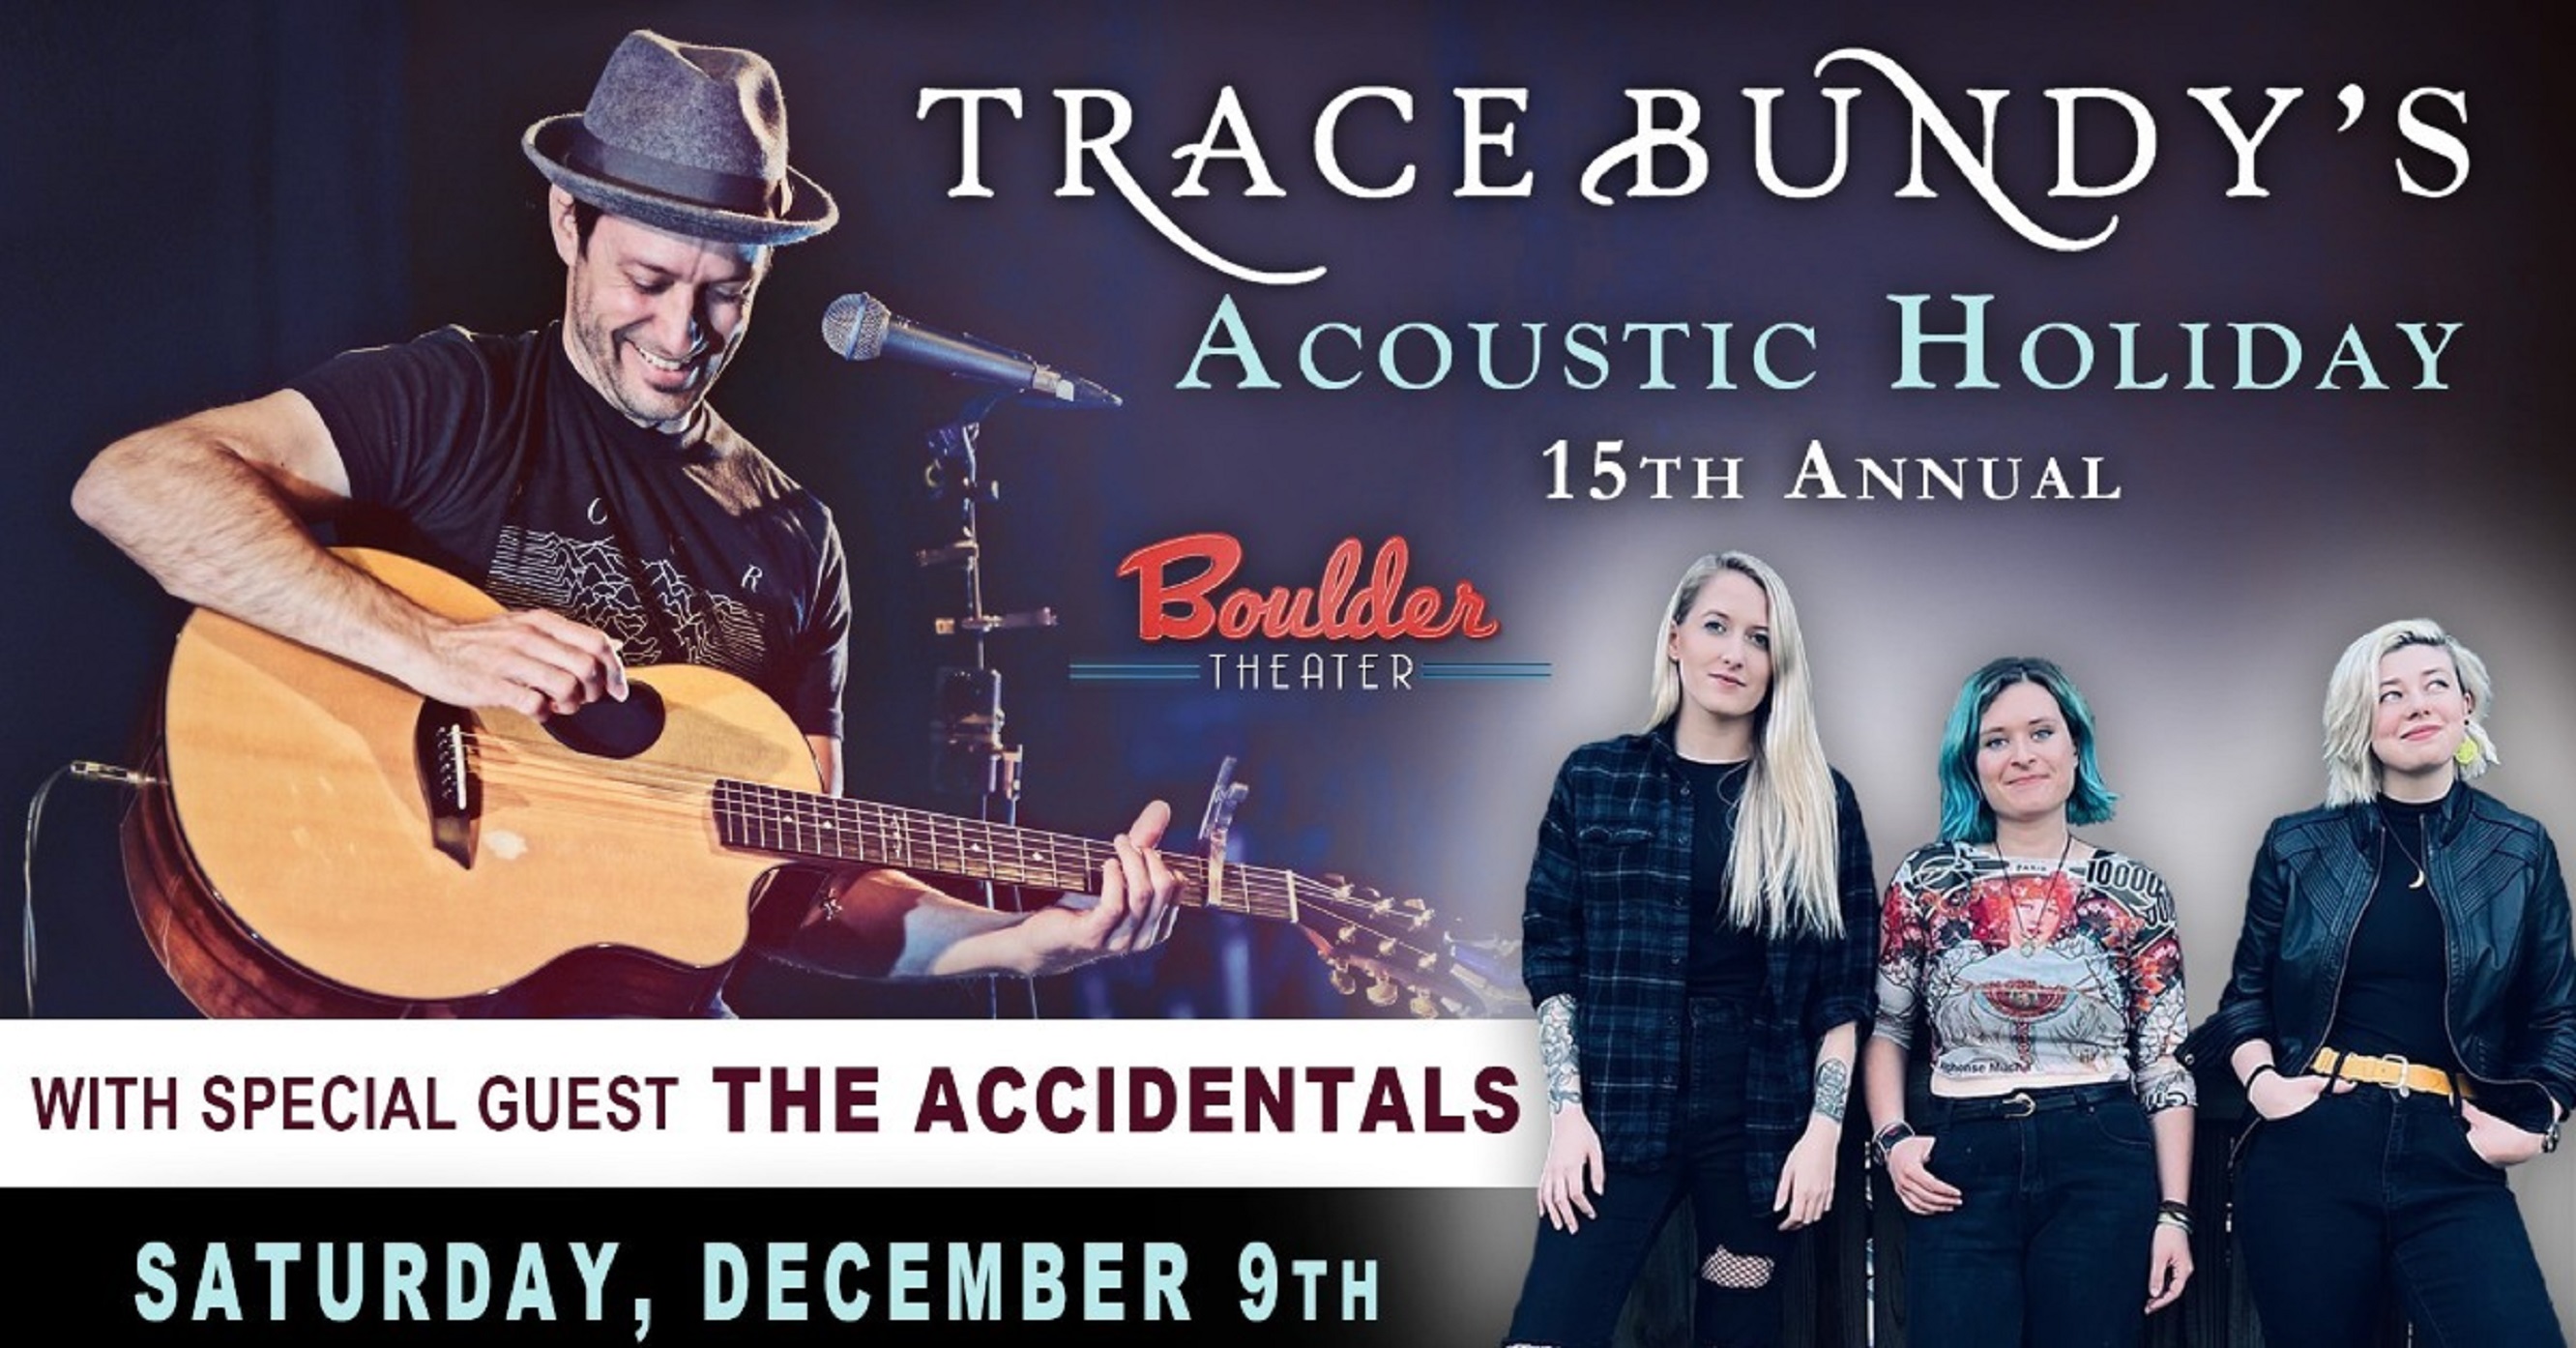 TRACE BUNDY TO ENCHANT AUDIENCES WITH HIS ACOUSTIC WIZARDRY IN THE 15TH ANNUAL ACOUSTIC HOLIDAY CONCERT